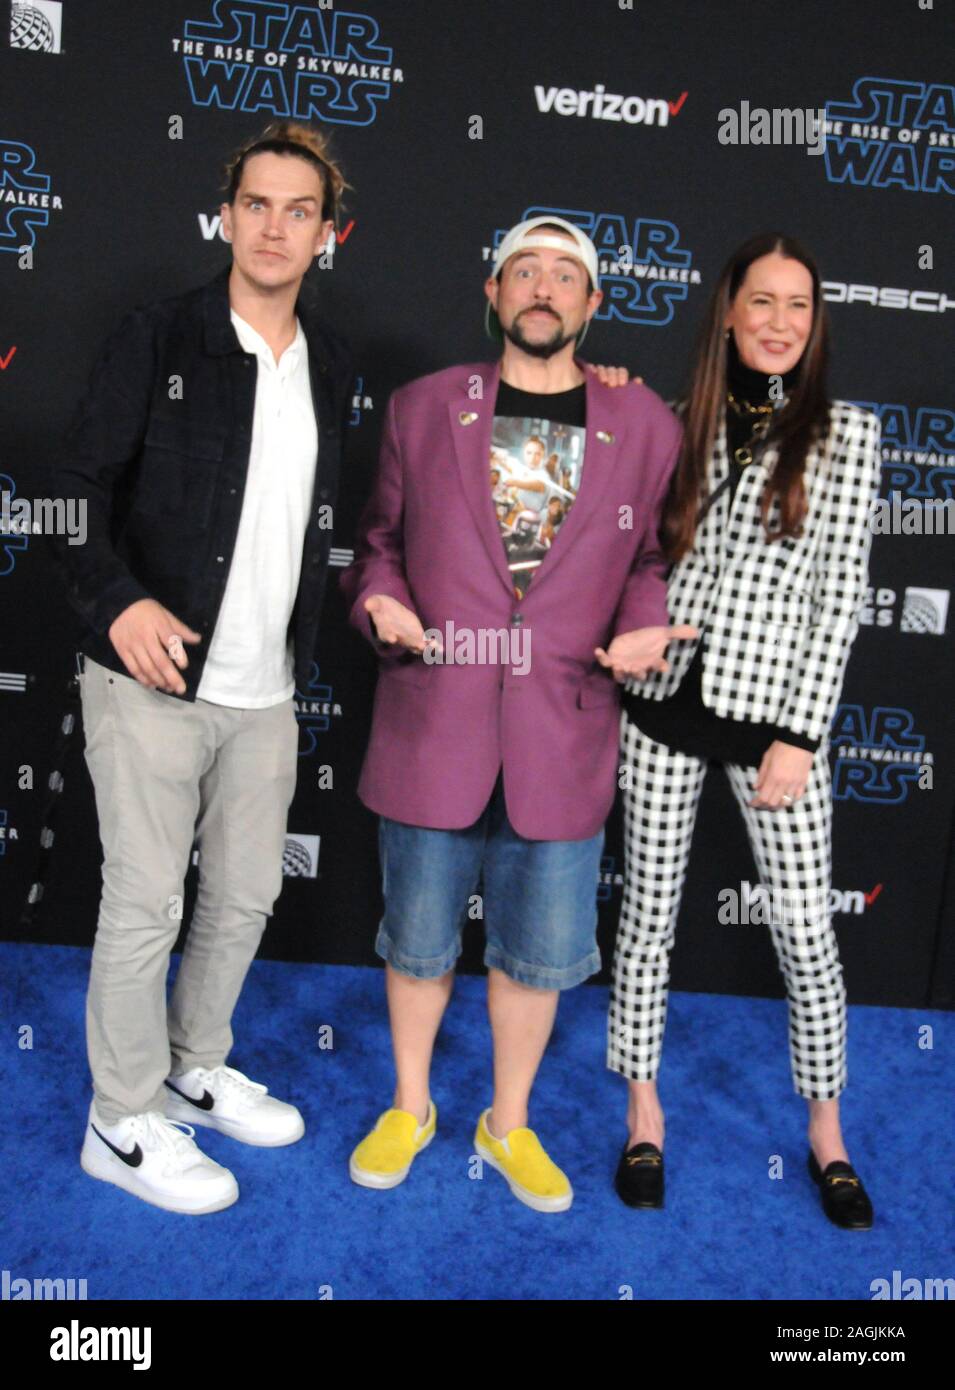 Hollywood, California, USA 16th December 2019 Actor Jason Mewes, director Kevin Smith and Jennifer Schwalbach attend Lucasfilm's World Premiere of 'Star Wars: The Rise of Skywalker' on December 16, 2019 in Hollywood, California, USA. Photo by Barry King/Alamy Stock Photo Stock Photo